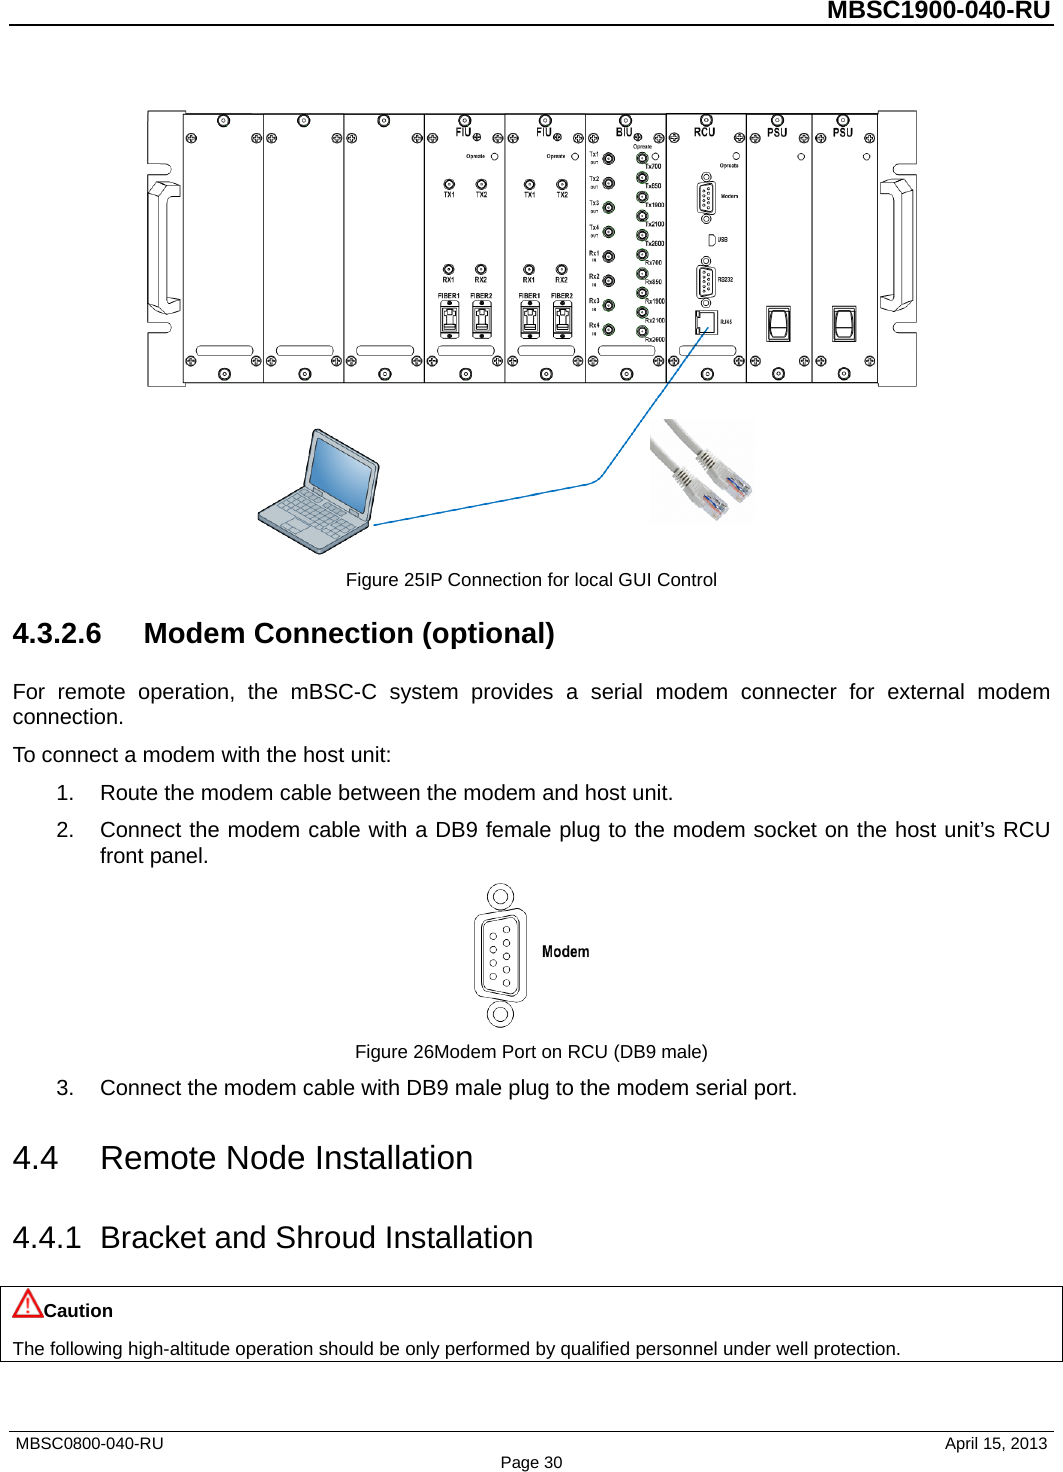          MBSC1900-040-RU    Figure 25IP Connection for local GUI Control 4.3.2.6 Modem Connection (optional) For remote operation, the mBSC-C system provides a serial modem connecter for external modem connection. To connect a modem with the host unit: 1. Route the modem cable between the modem and host unit. 2. Connect the modem cable with a DB9 female plug to the modem socket on the host unit’s RCU front panel.  Figure 26Modem Port on RCU (DB9 male) 3. Connect the modem cable with DB9 male plug to the modem serial port. 4.4 Remote Node Installation 4.4.1 Bracket and Shroud Installation Caution The following high-altitude operation should be only performed by qualified personnel under well protection. MBSC0800-040-RU                                      April 15, 2013 Page 30 